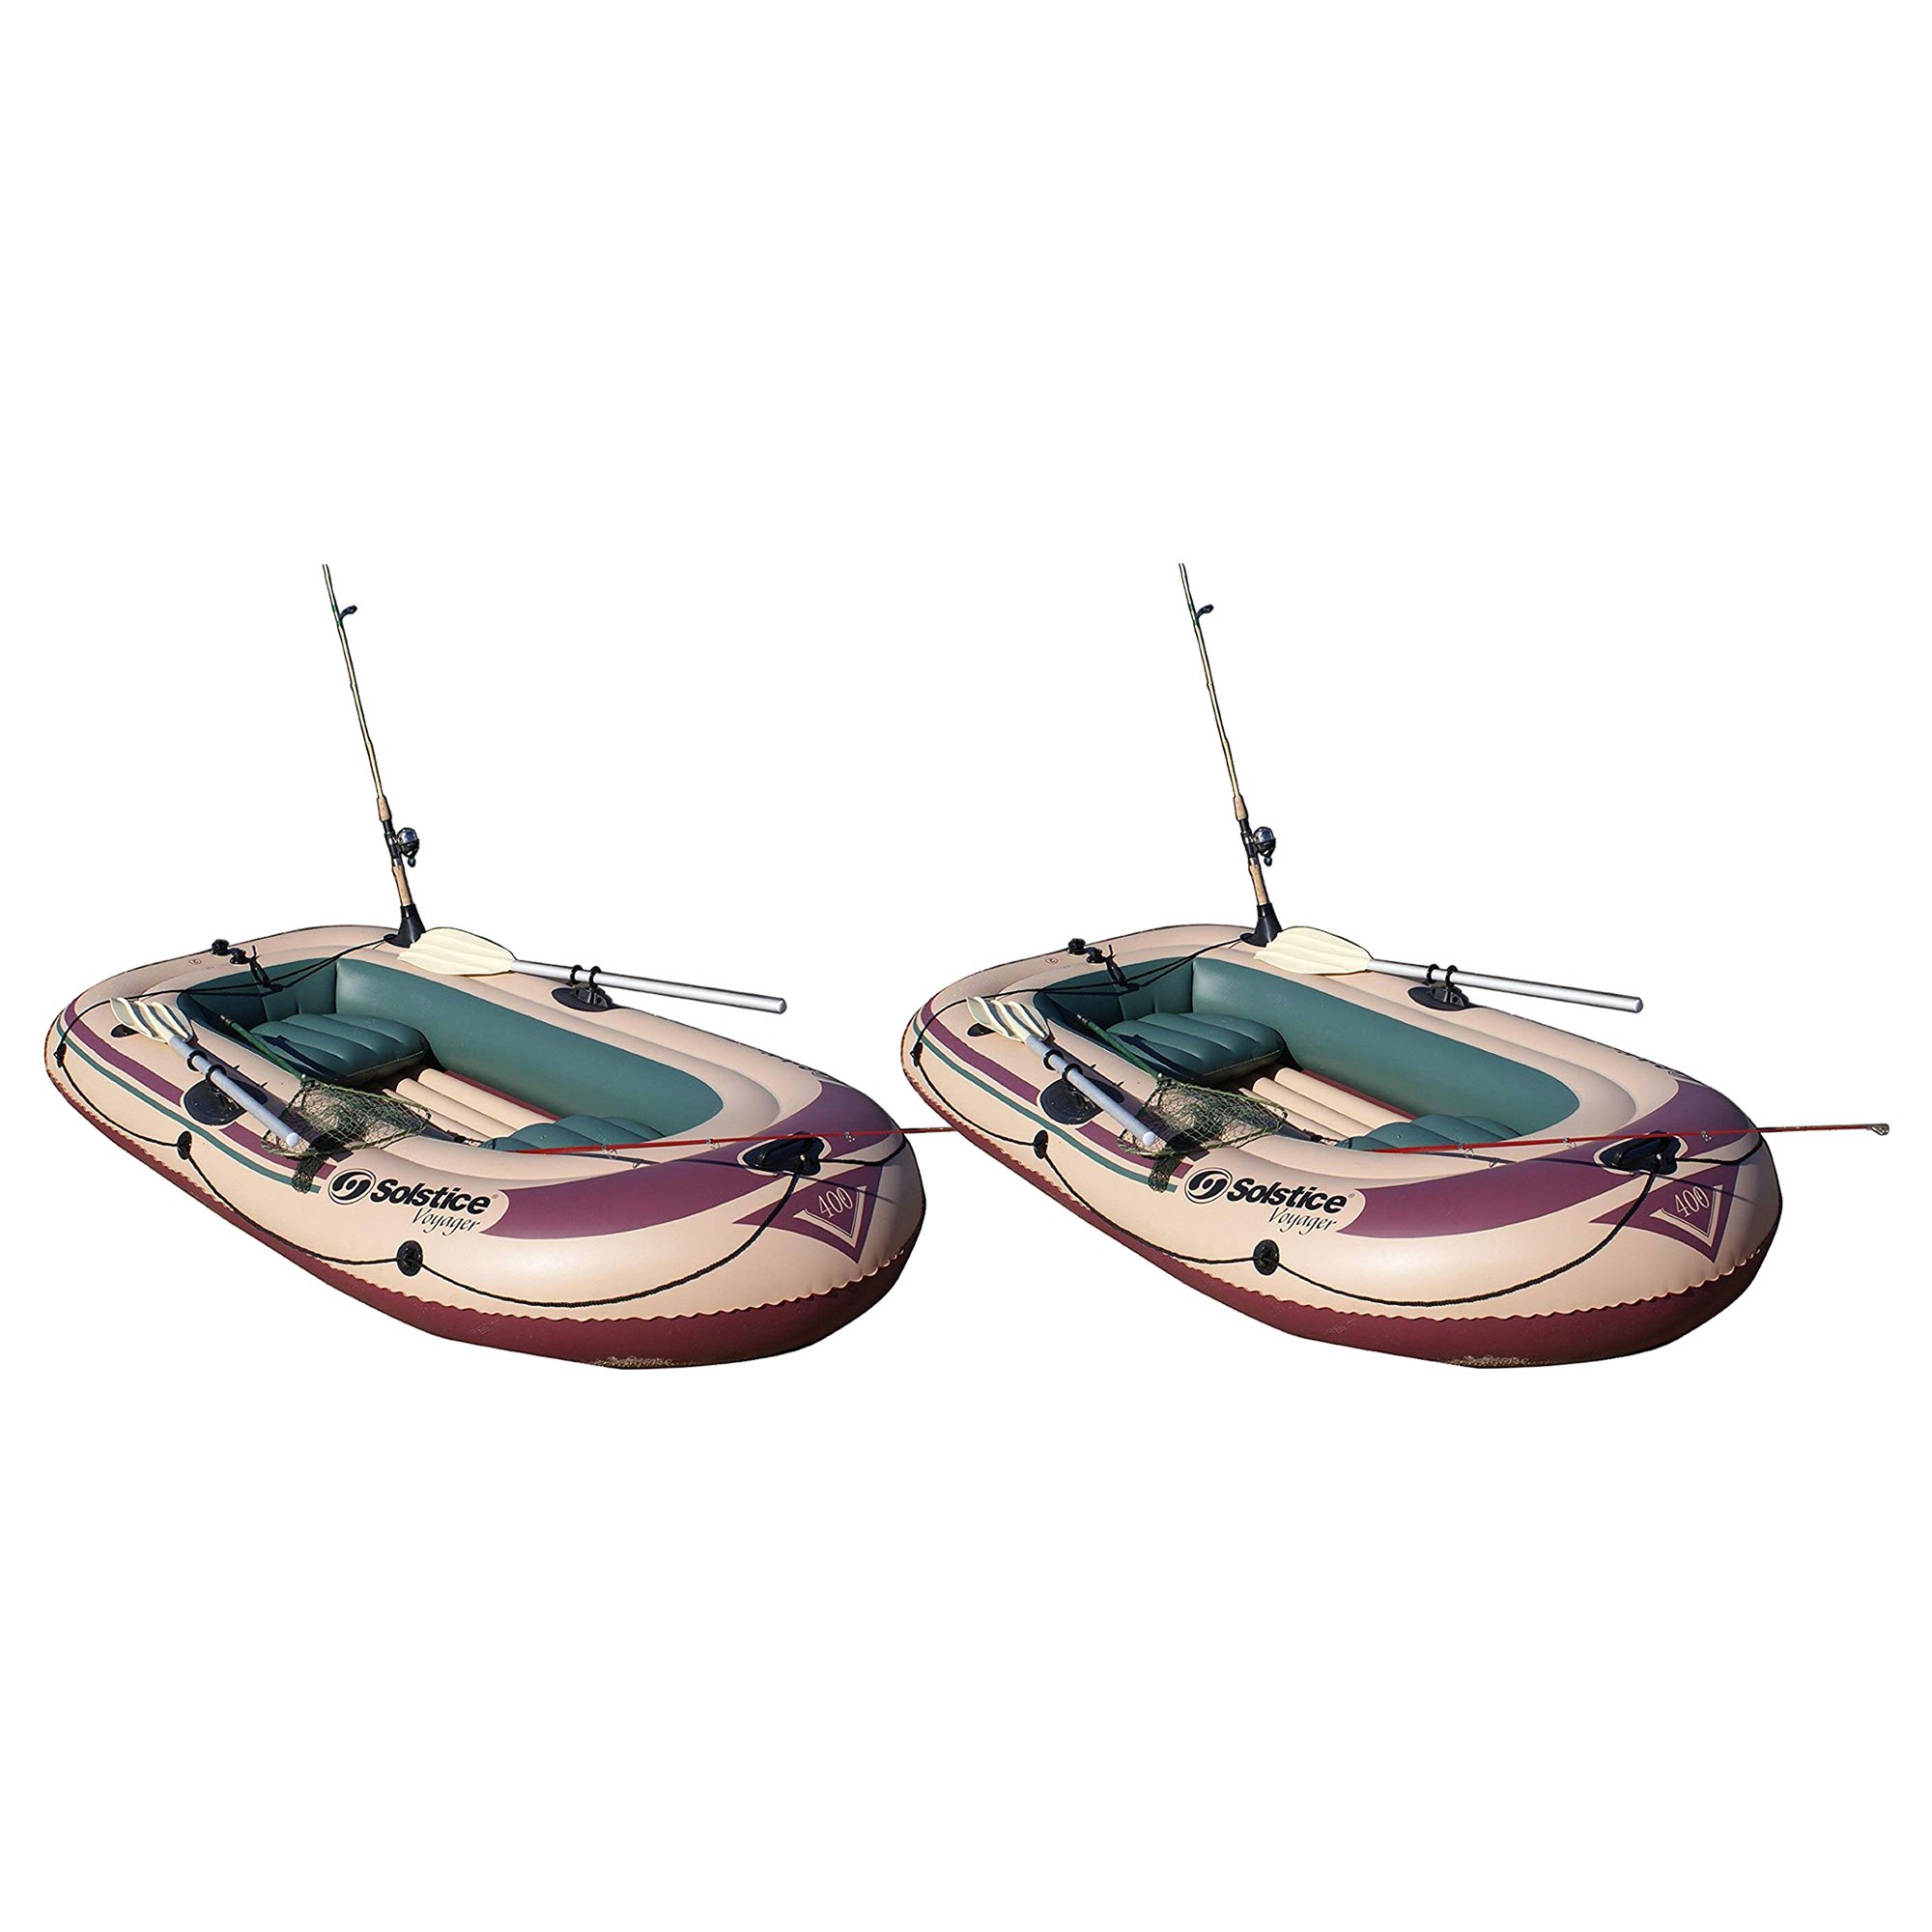 SOLSTICE Inflatable Fishing Boat Rafts 2 to 6 Person Options for Adults  Compatible with Motor Comes W/Accessories Pole Holders Cushions Grab Line 6  to 12 Ft Siz…